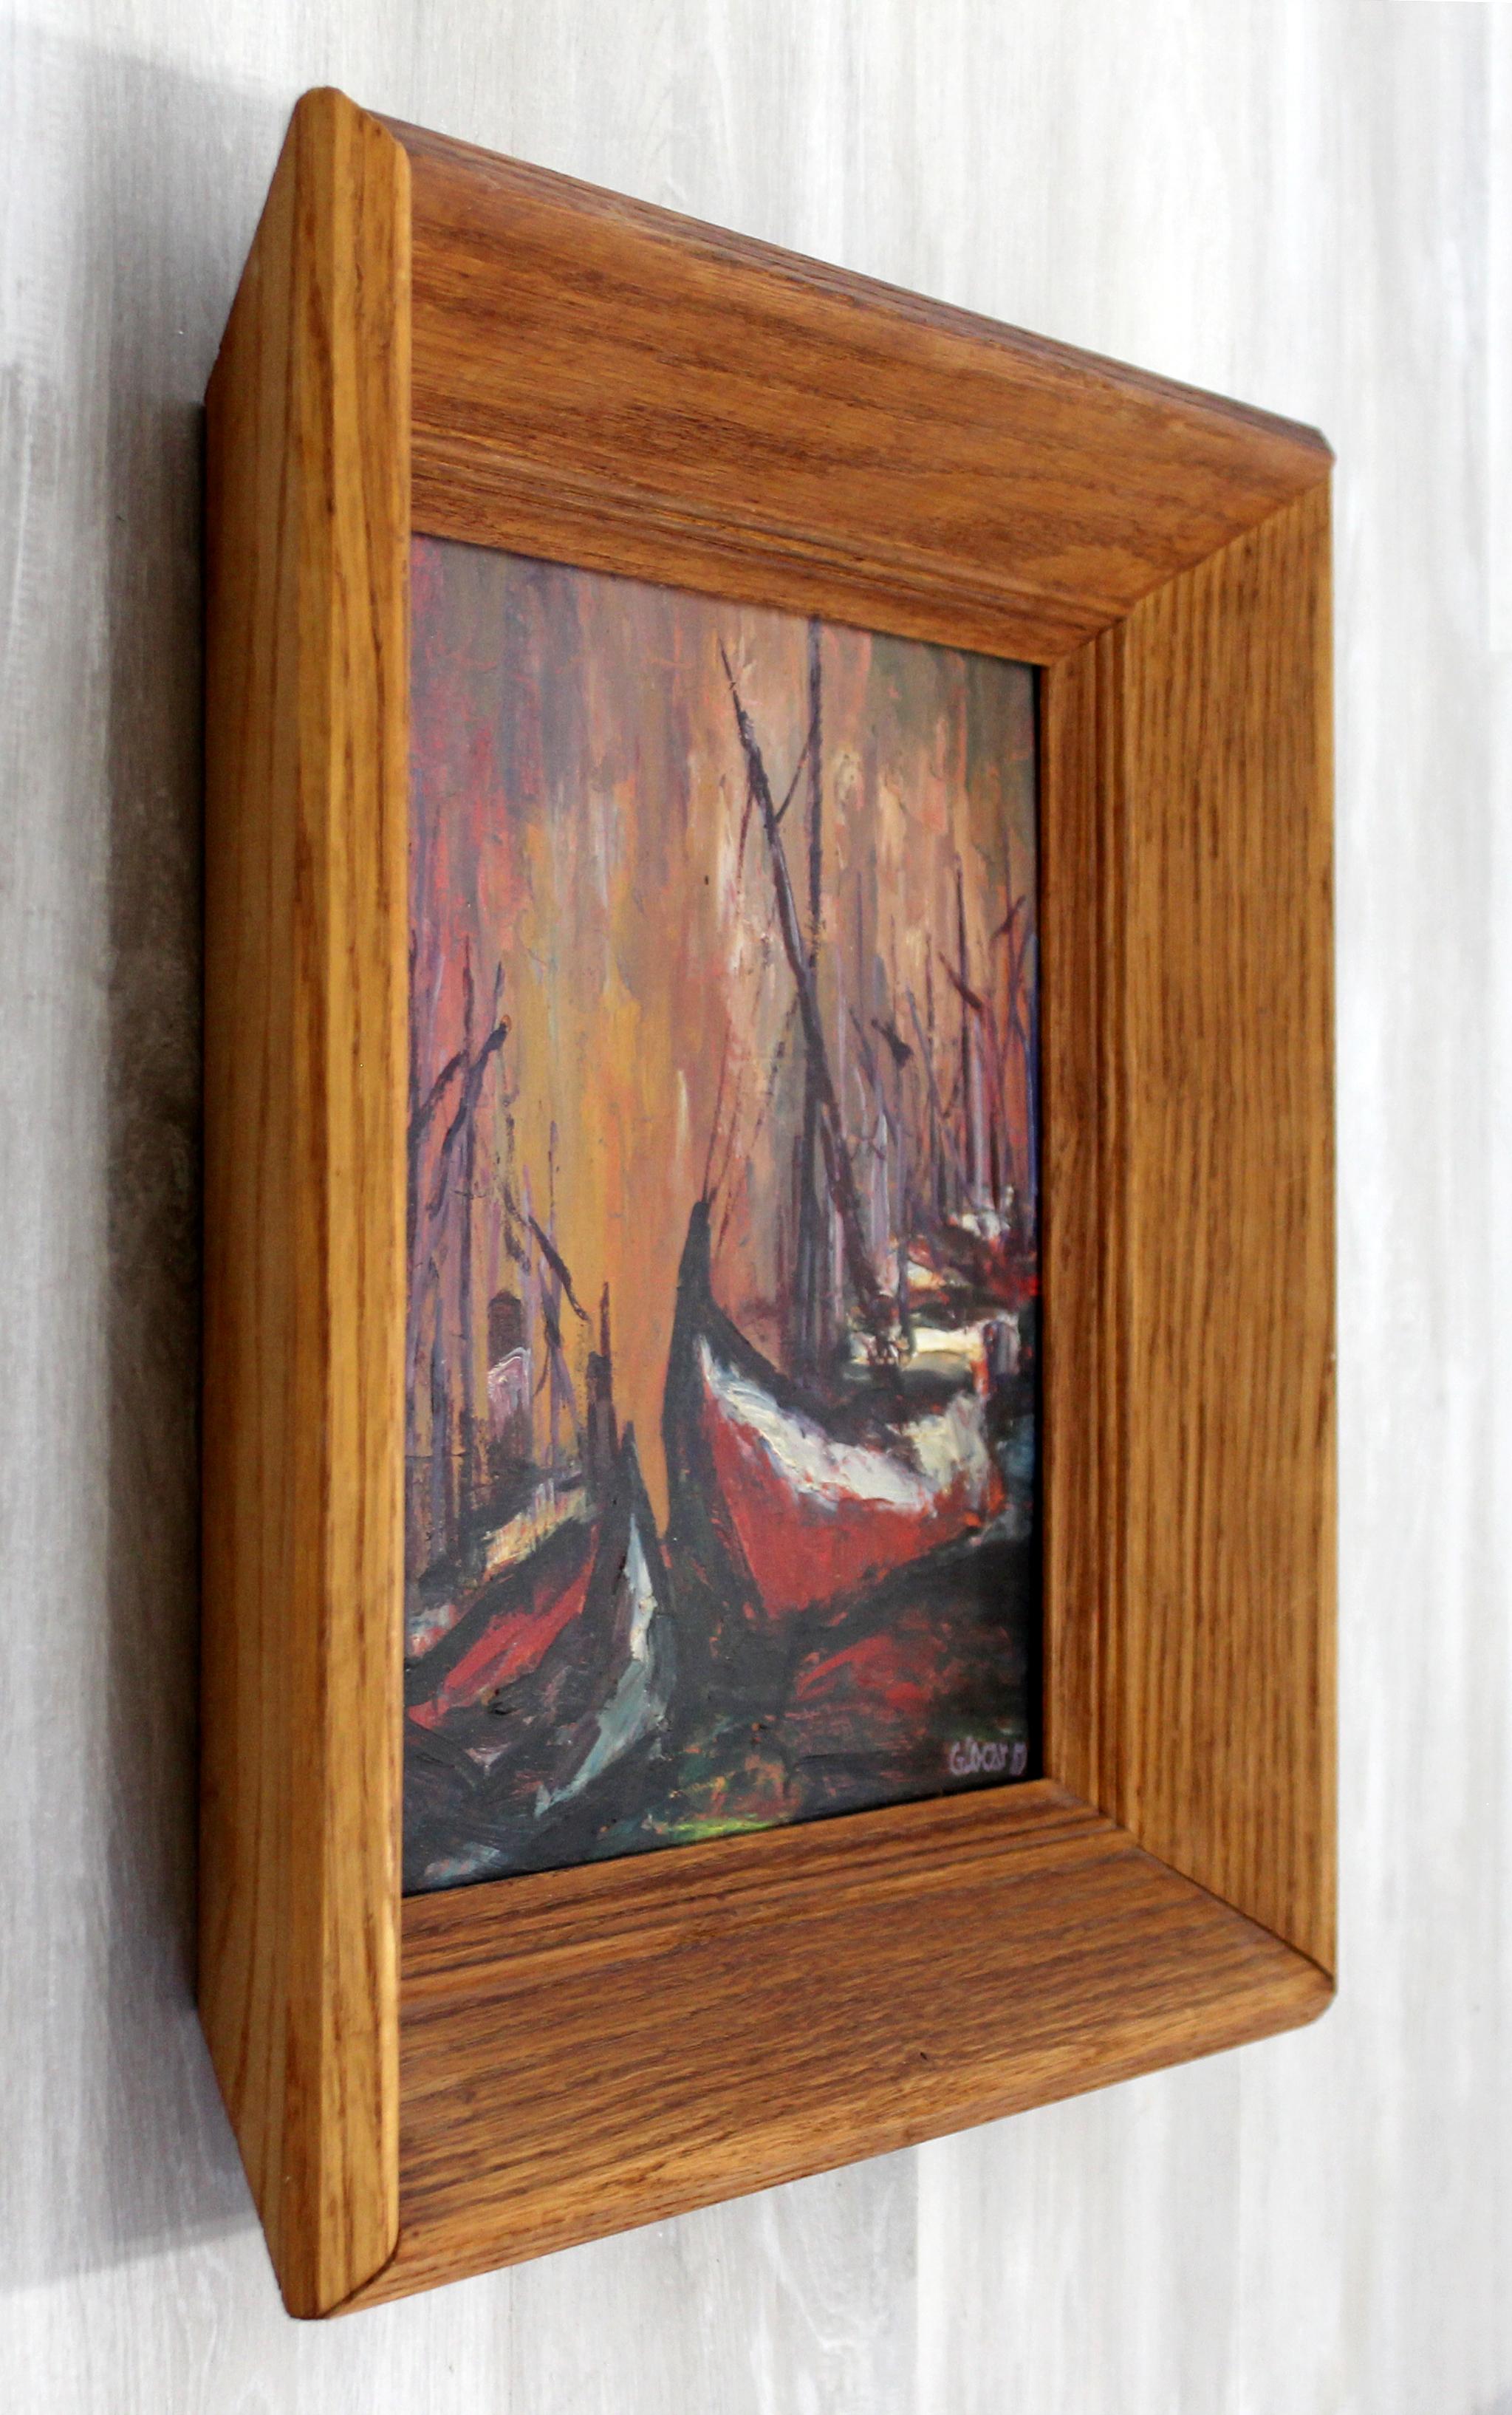 Late 20th Century Mid-Century Modern Framed Oil on Board Painting Signed by Emilan Glocar 1970s